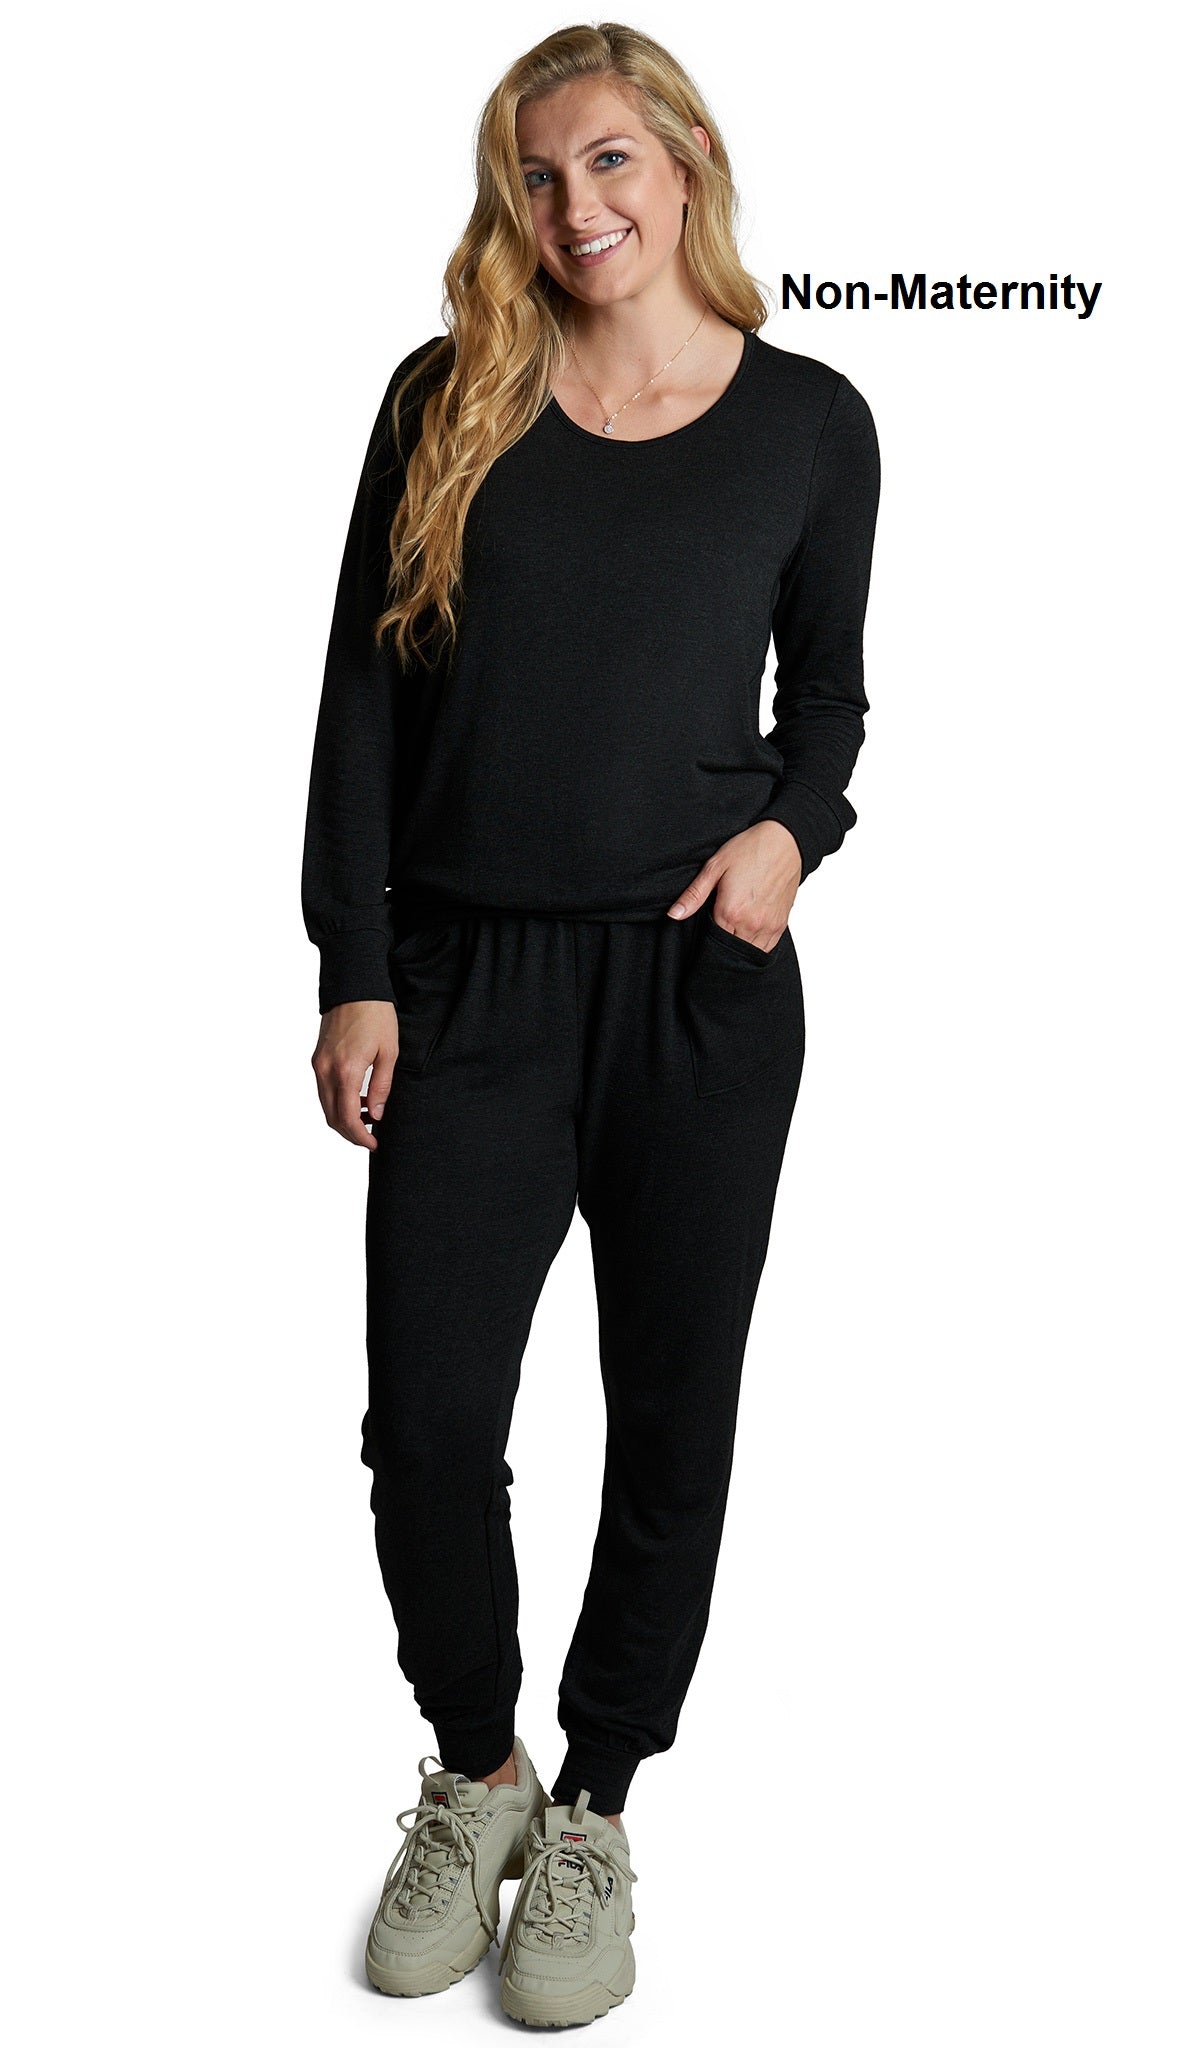 French Terry Black Whitney 2-Piece on woman wearing as non-maternity. Long sleeve top with nursing access on sides and long pant with cuff.